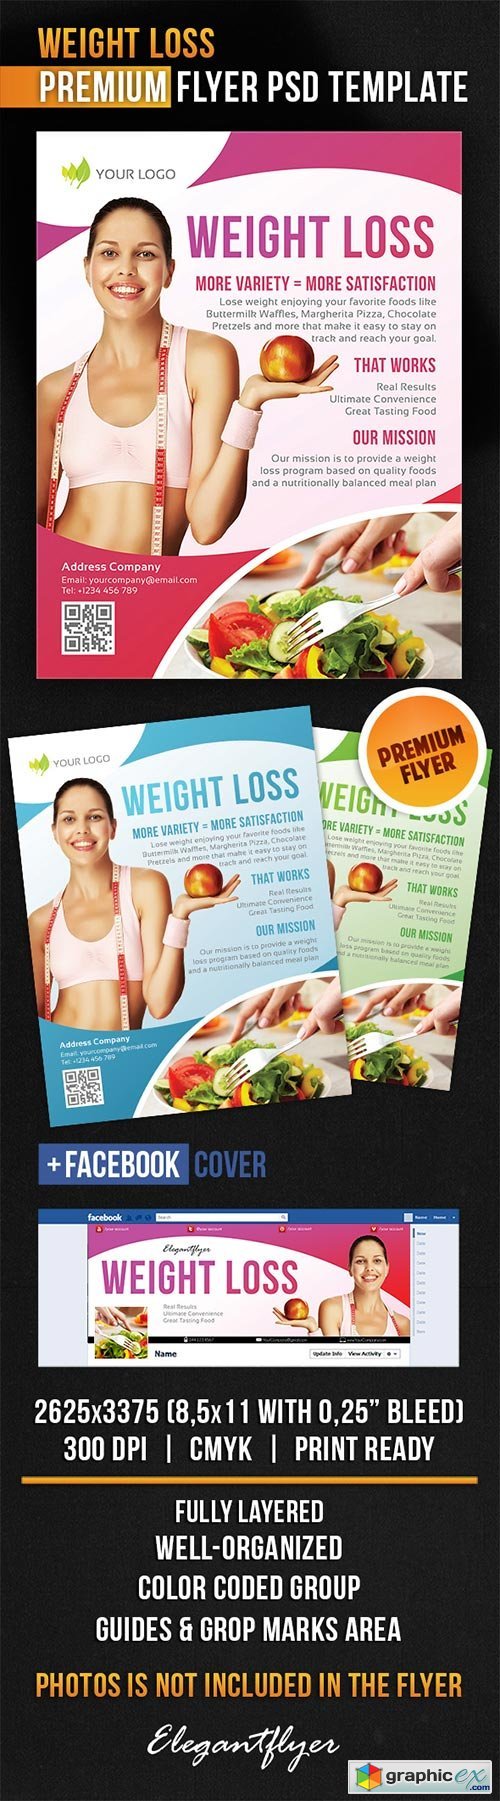 Weight Loss Flyer PSD Template + Facebook Cover